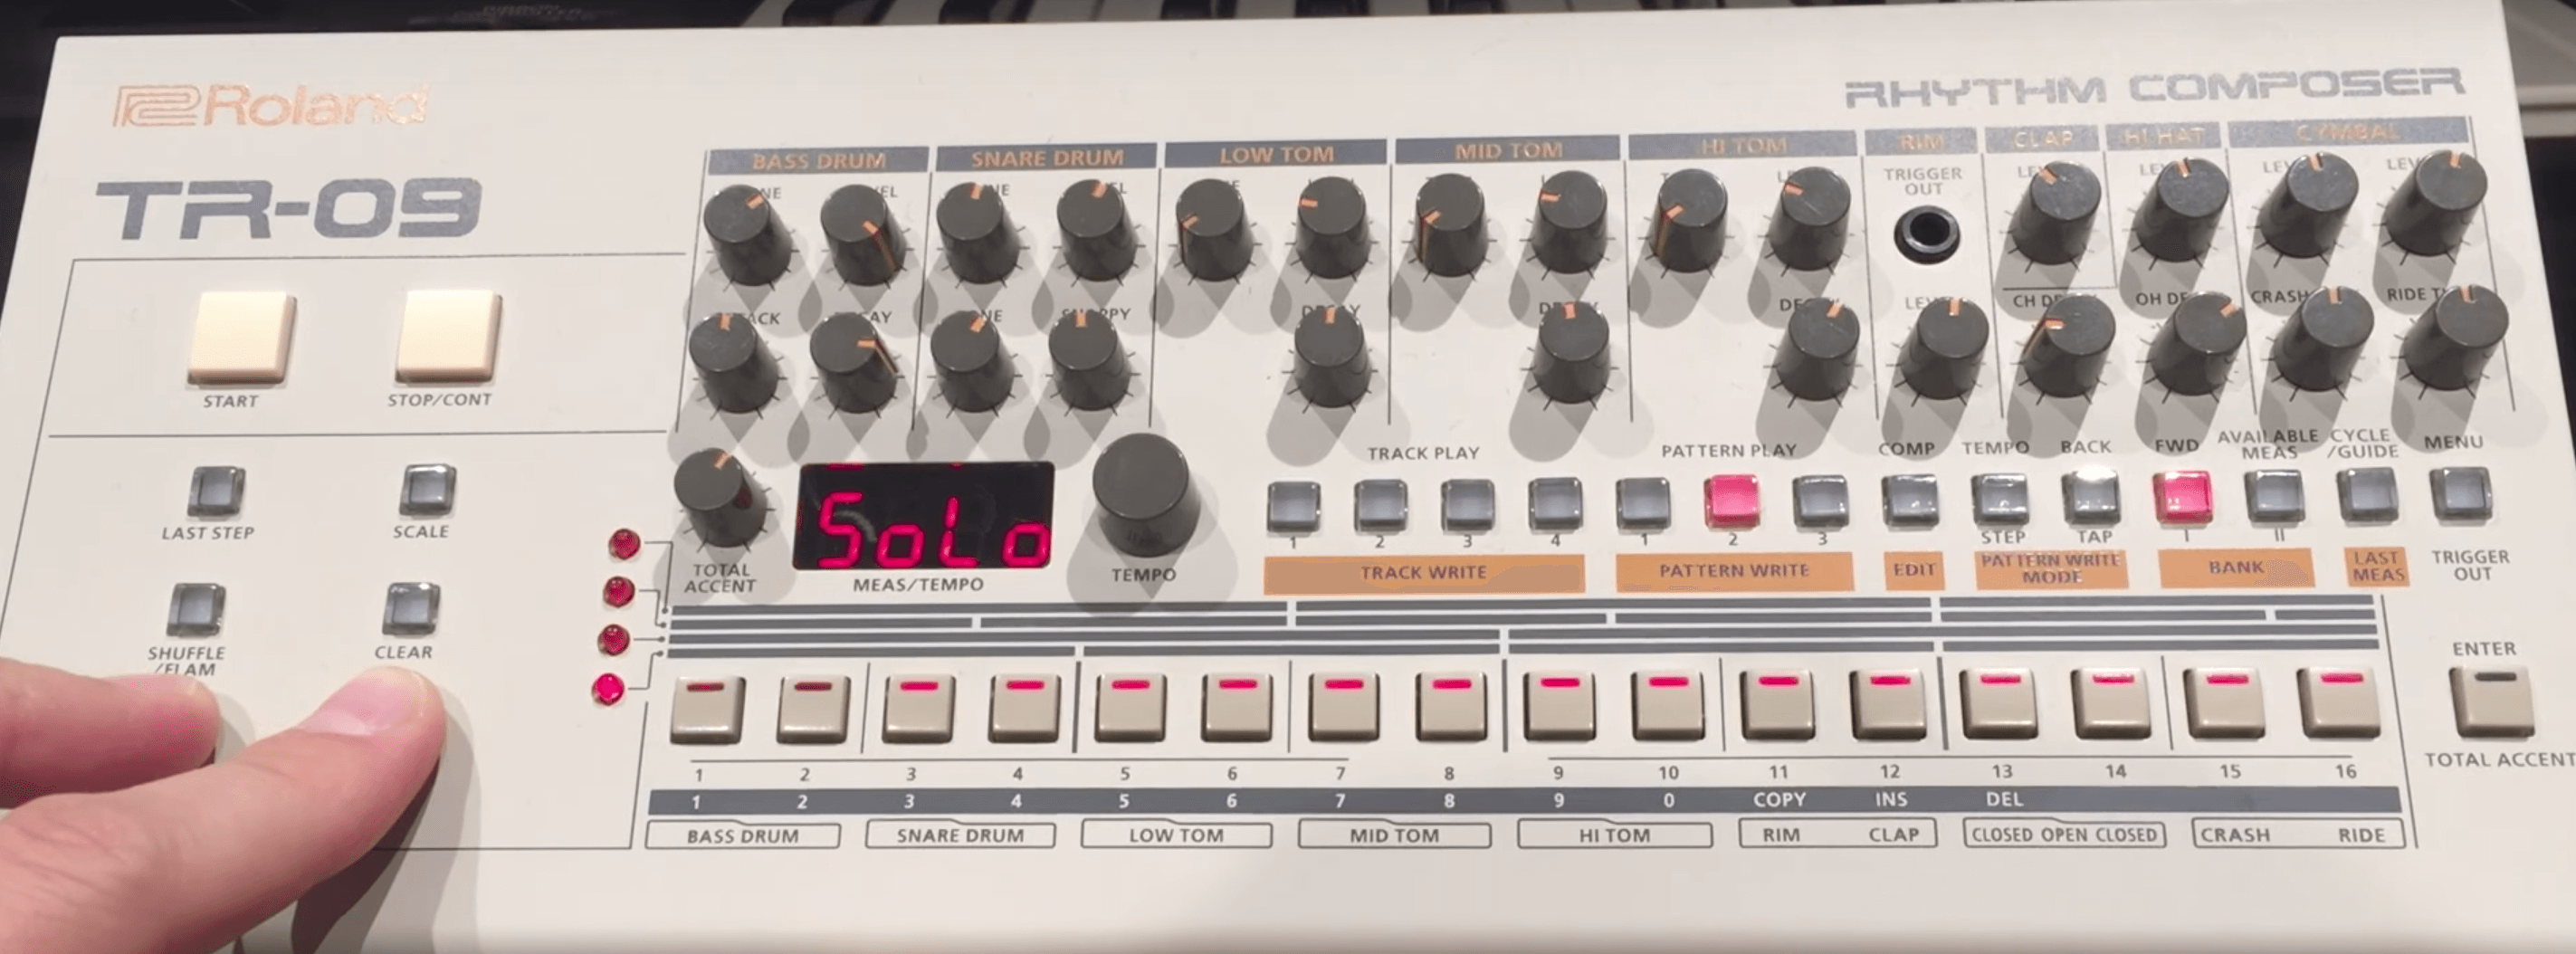 Get the most out of the Roland TR-09 with these hidden features